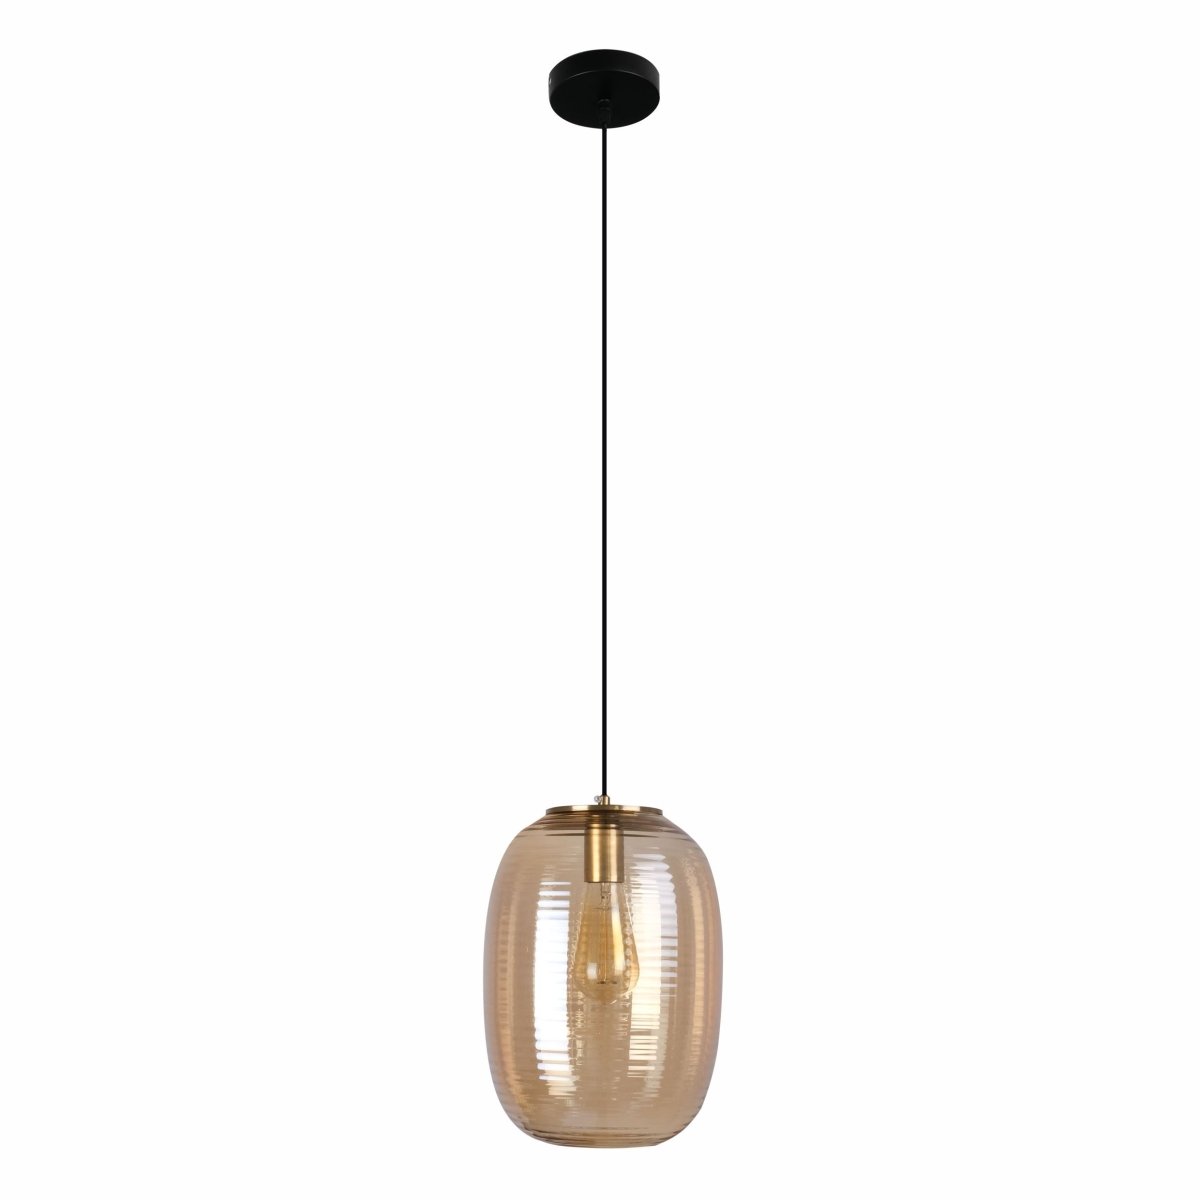 Main image of Bee Hive Amber Glass Pendant Light with E27 Fitting | TEKLED 159-17344